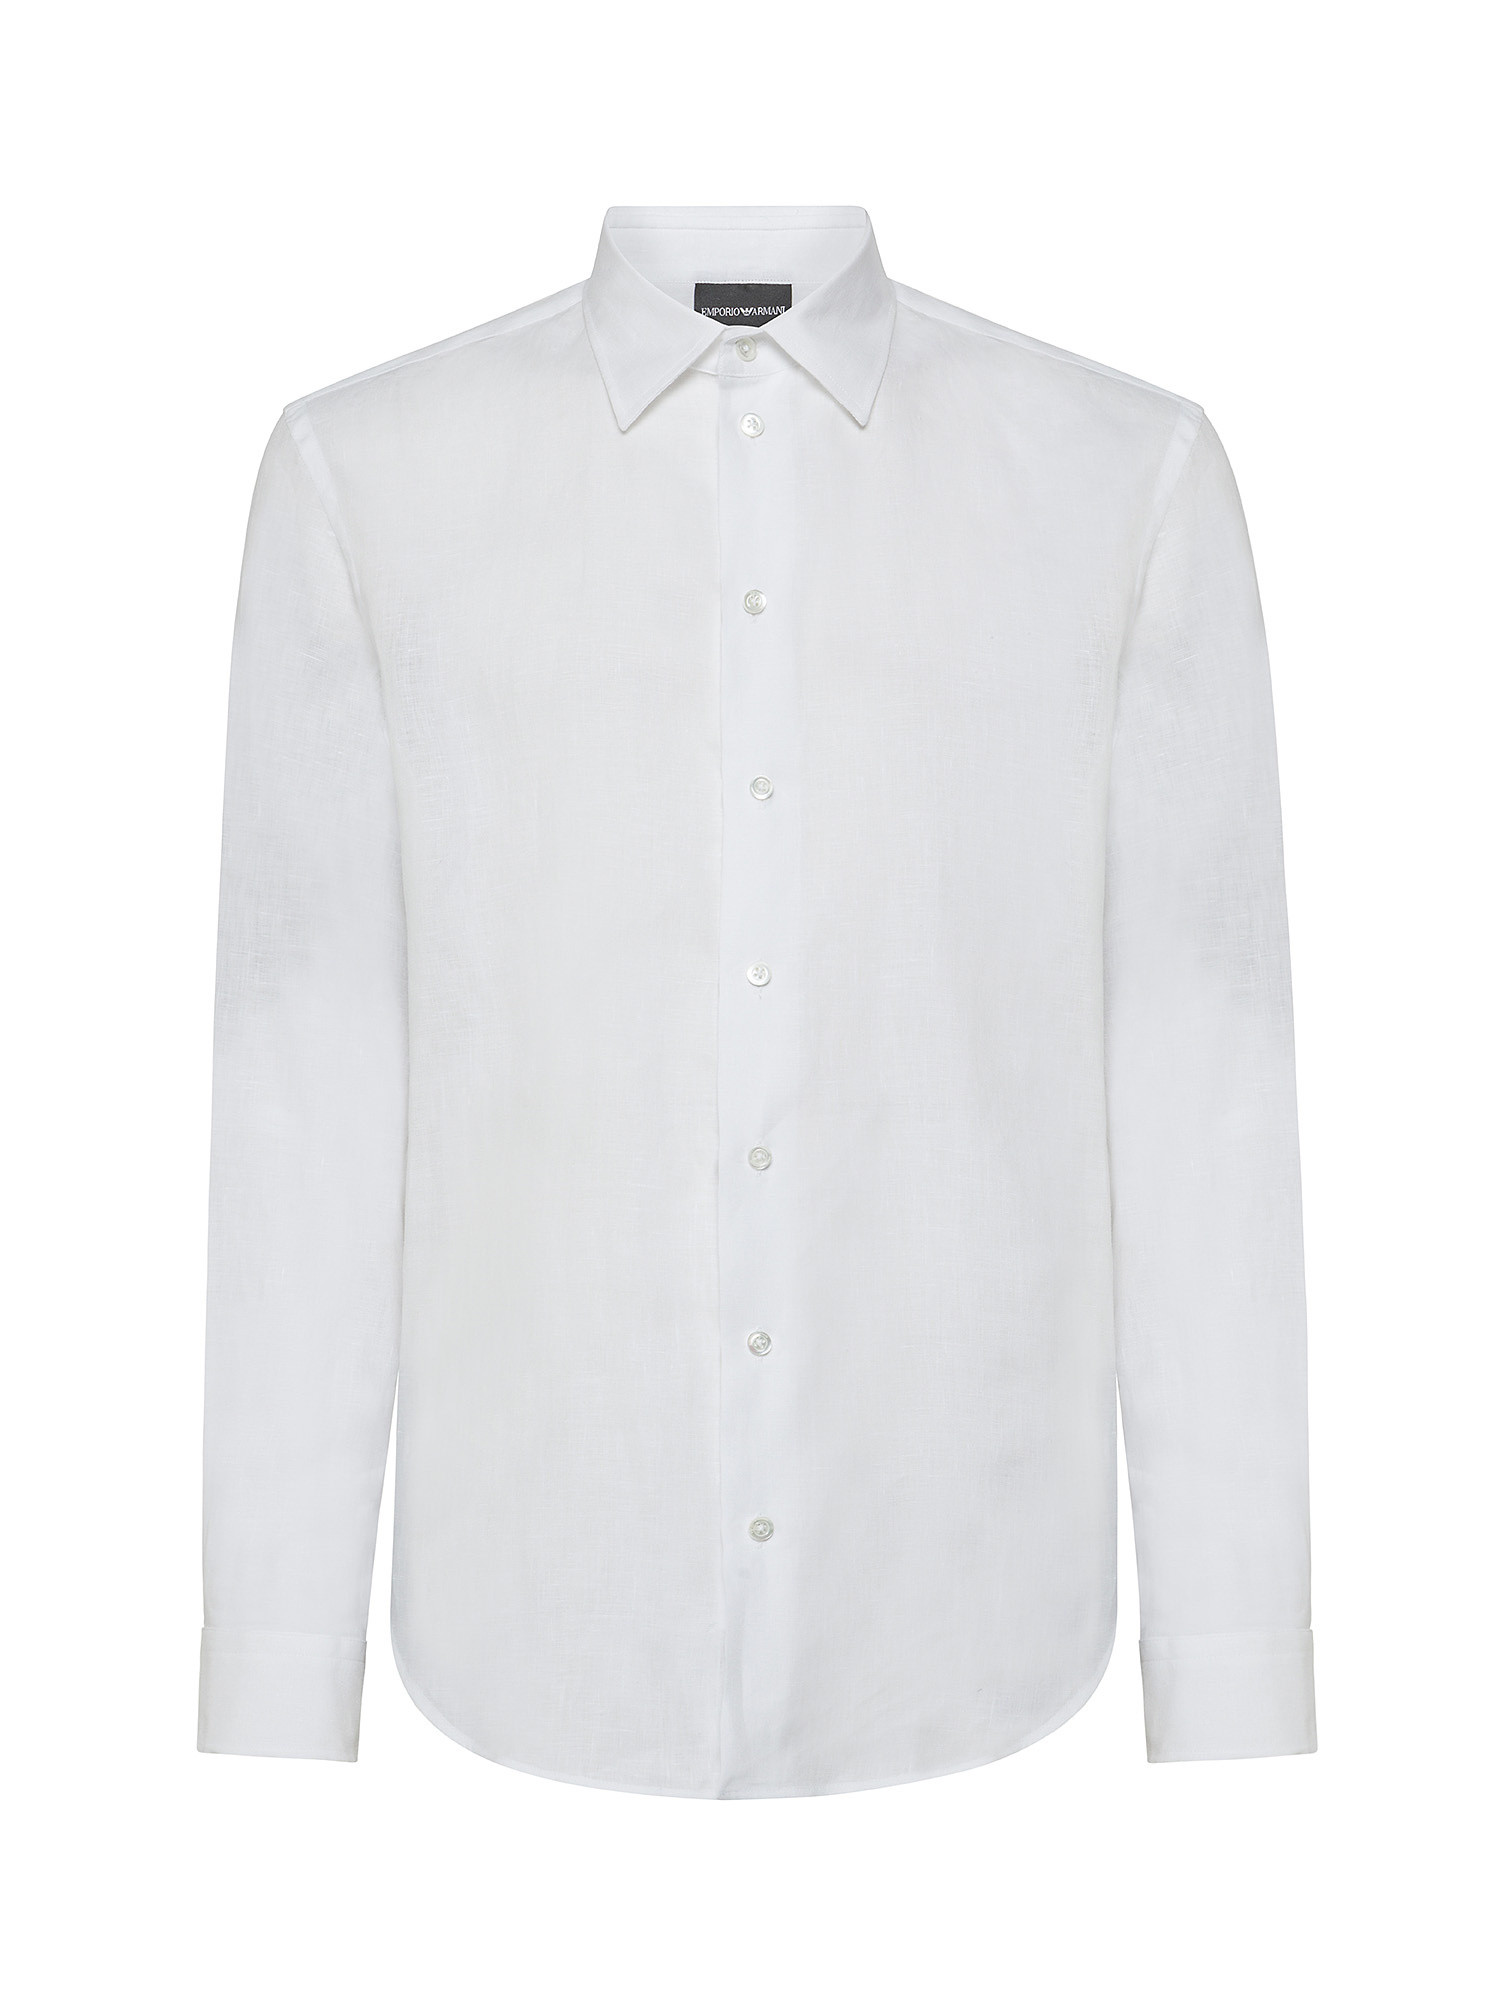 Emporio Armani - Camicia relaxed fit in puro lino, Bianco, large image number 1